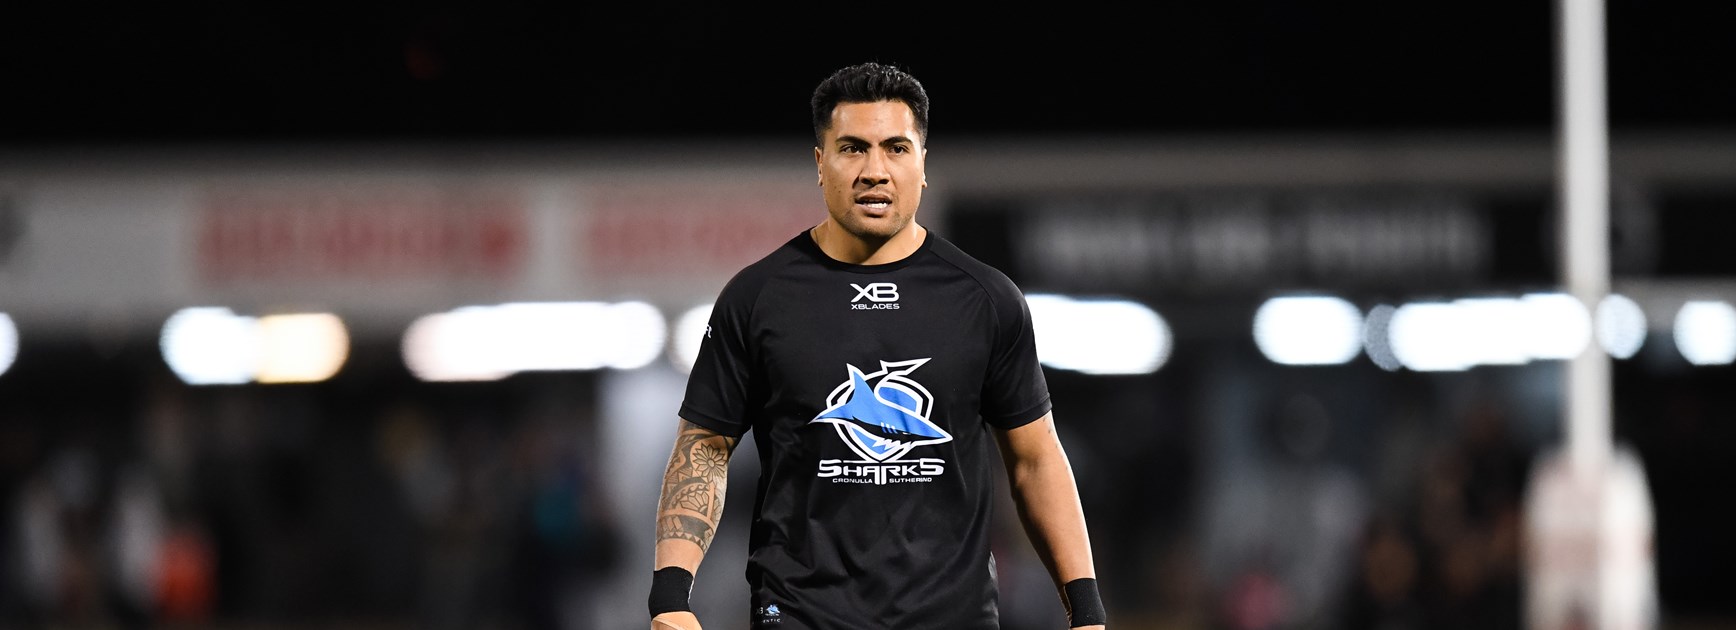 Feki confident next generation will wing it when he vacates flank